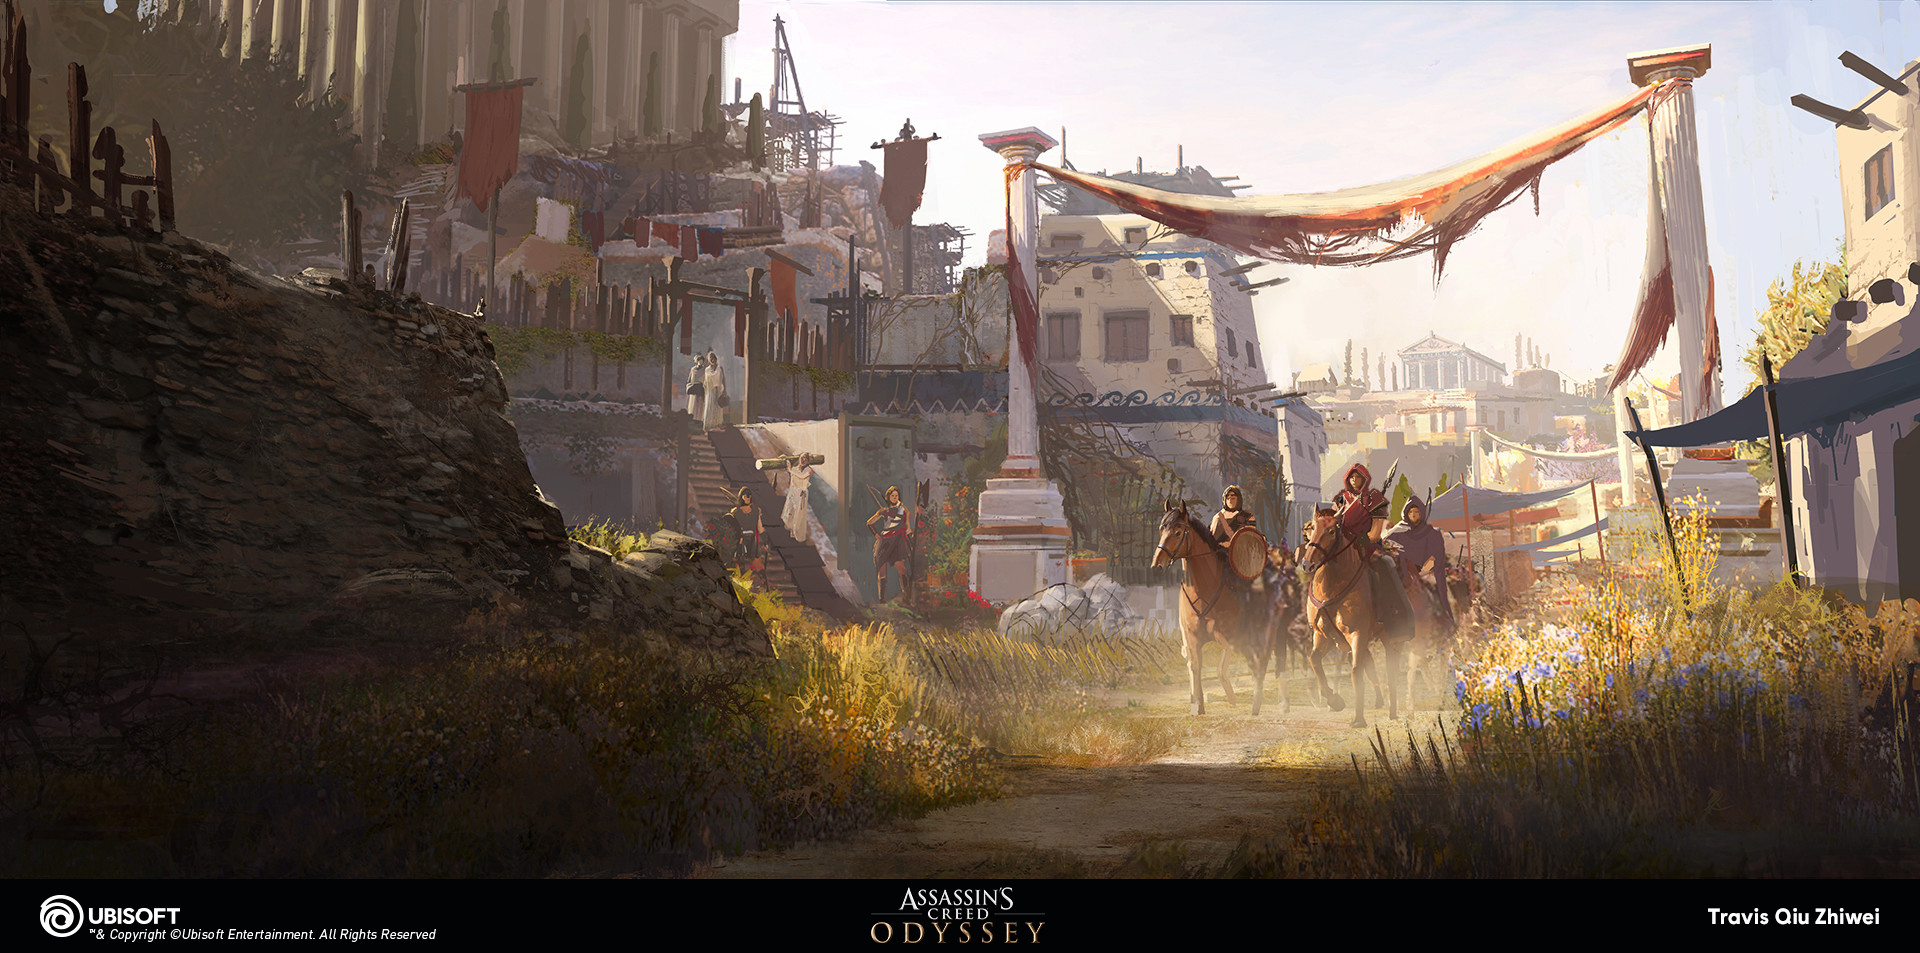 Assassin's Creed Odyssey: Lesbos Concept Art.